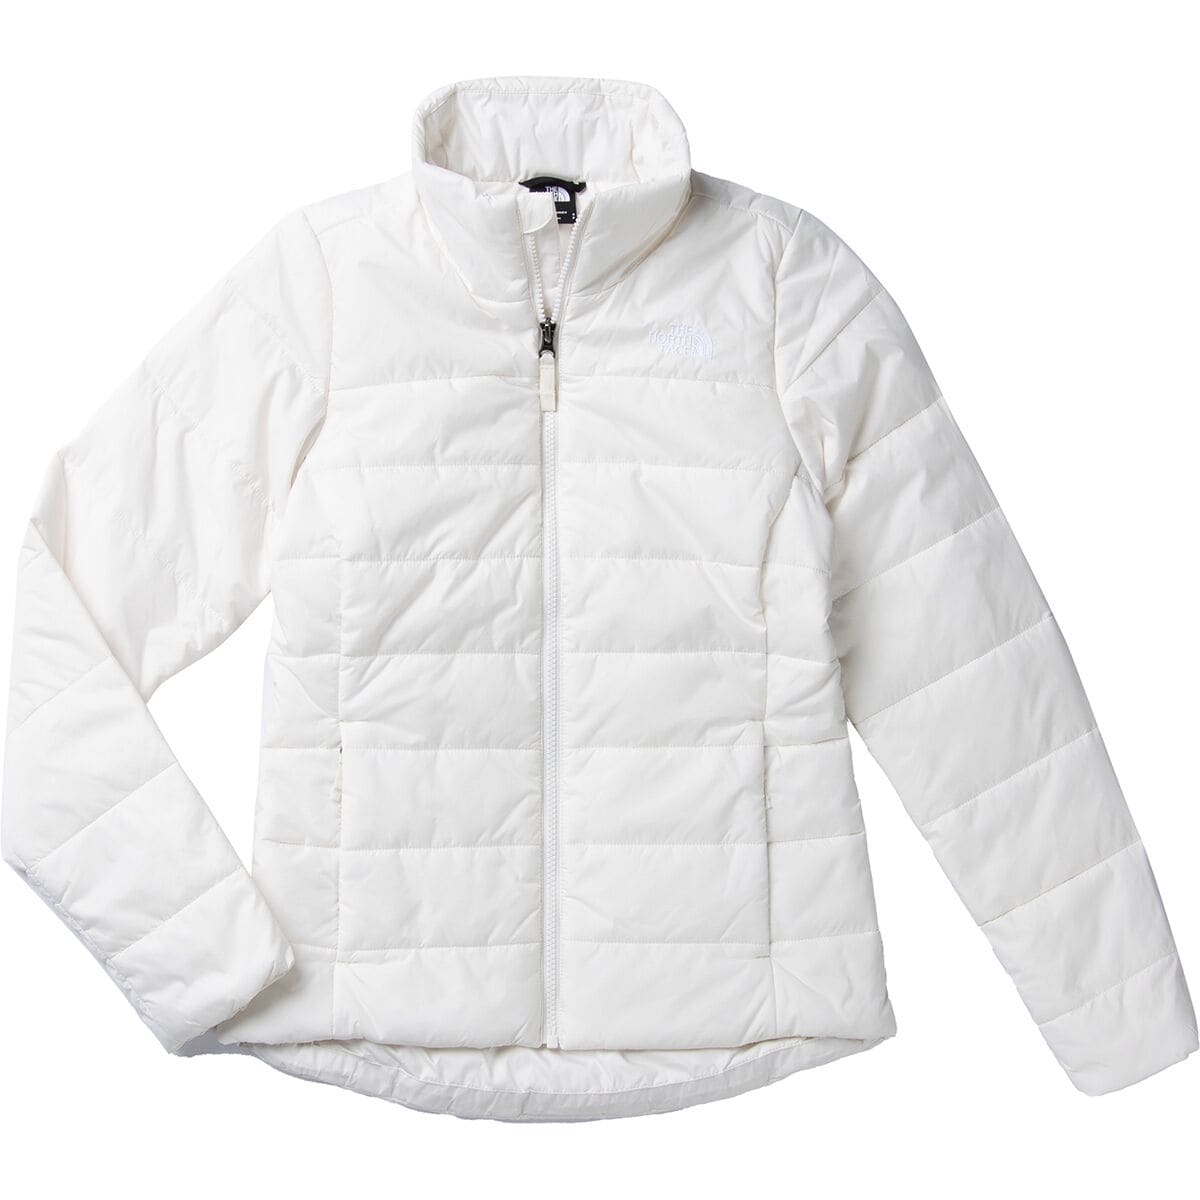 Flare Jacket - Women's by The North Face | US-Parks.com